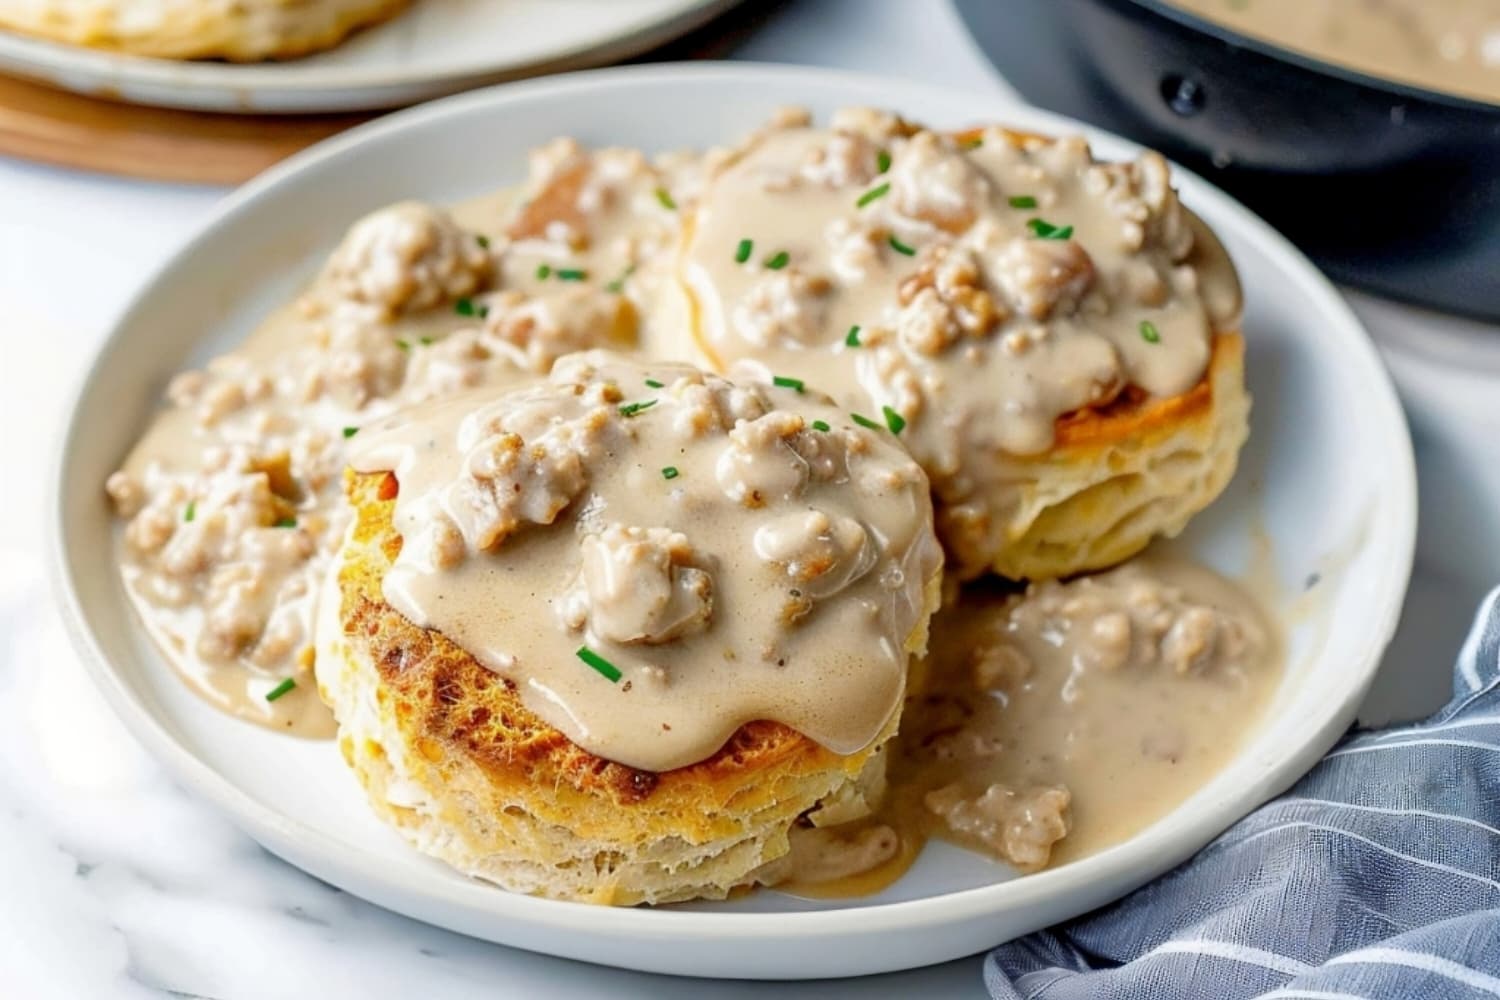 Biscuits and gravy in a white plate, a savory and comforting dish